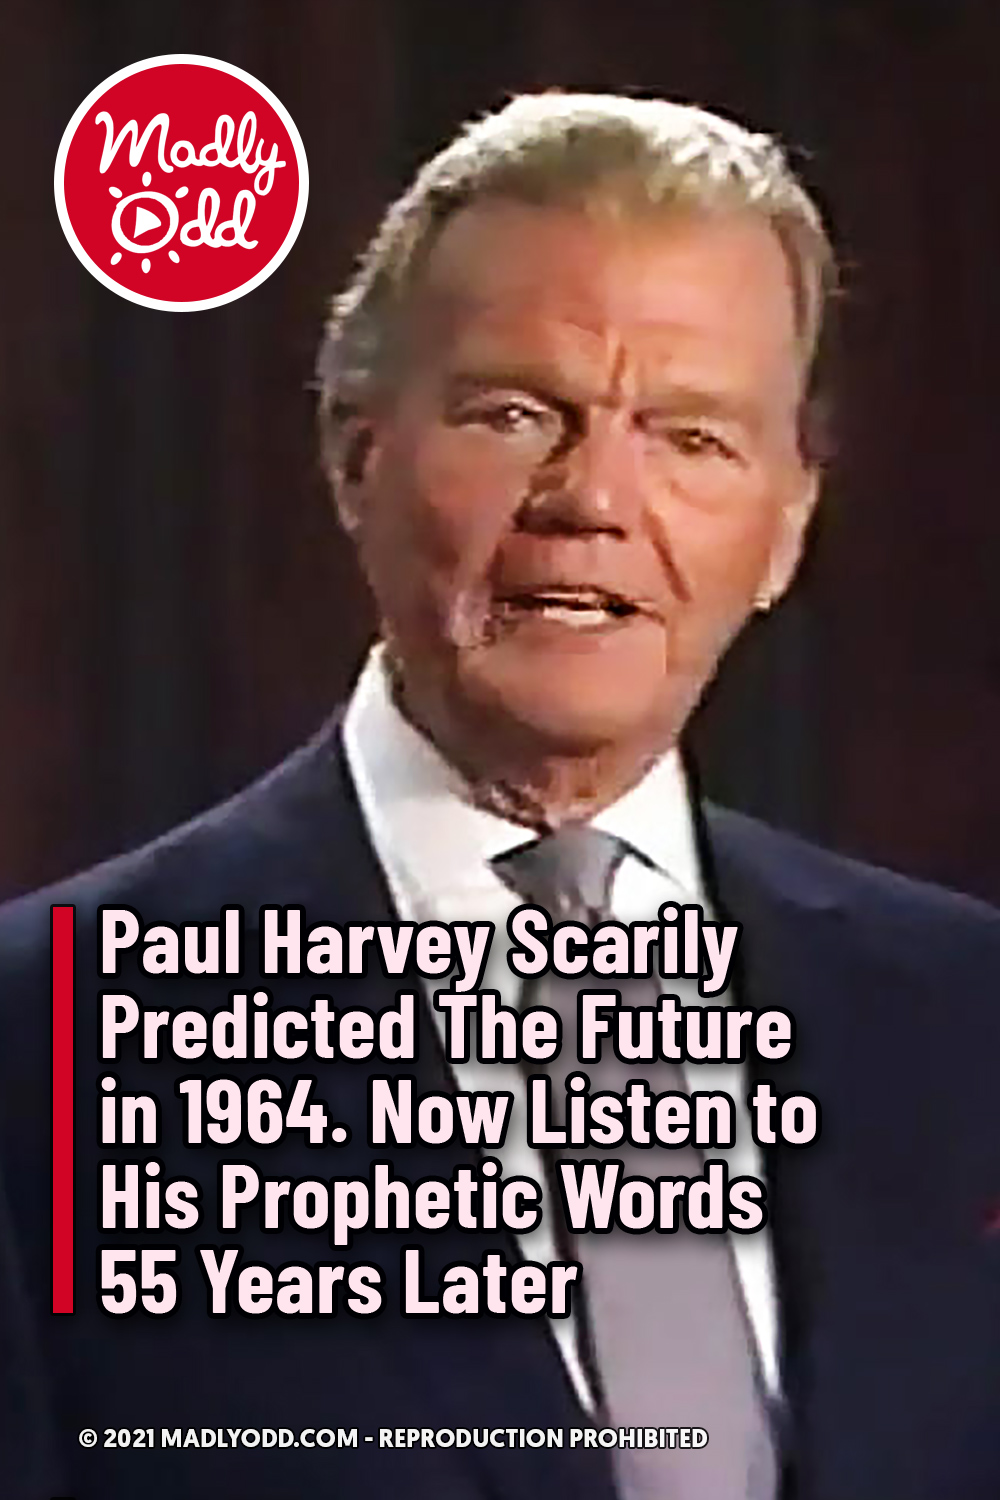 Paul Harvey Scarily Predicted The Future in 1964. Now Listen to His Prophetic Words 55 Years Later